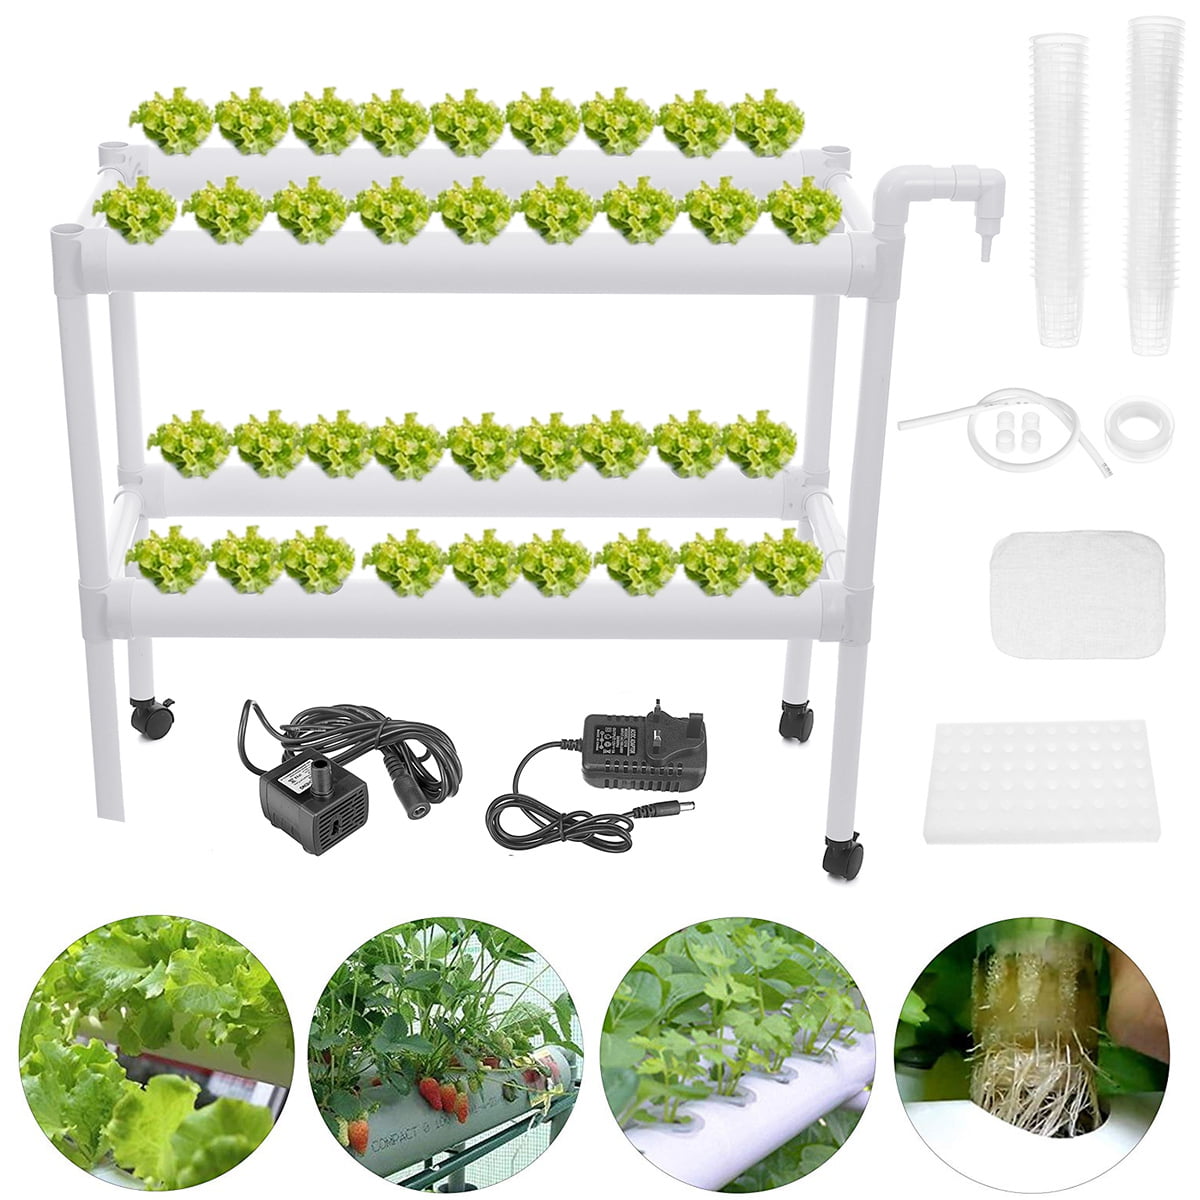 TECHTONGDA Hydroponic 72 Plant Grow Kit 2 Layers 8 Pipes 110v Water Pump for sale online 